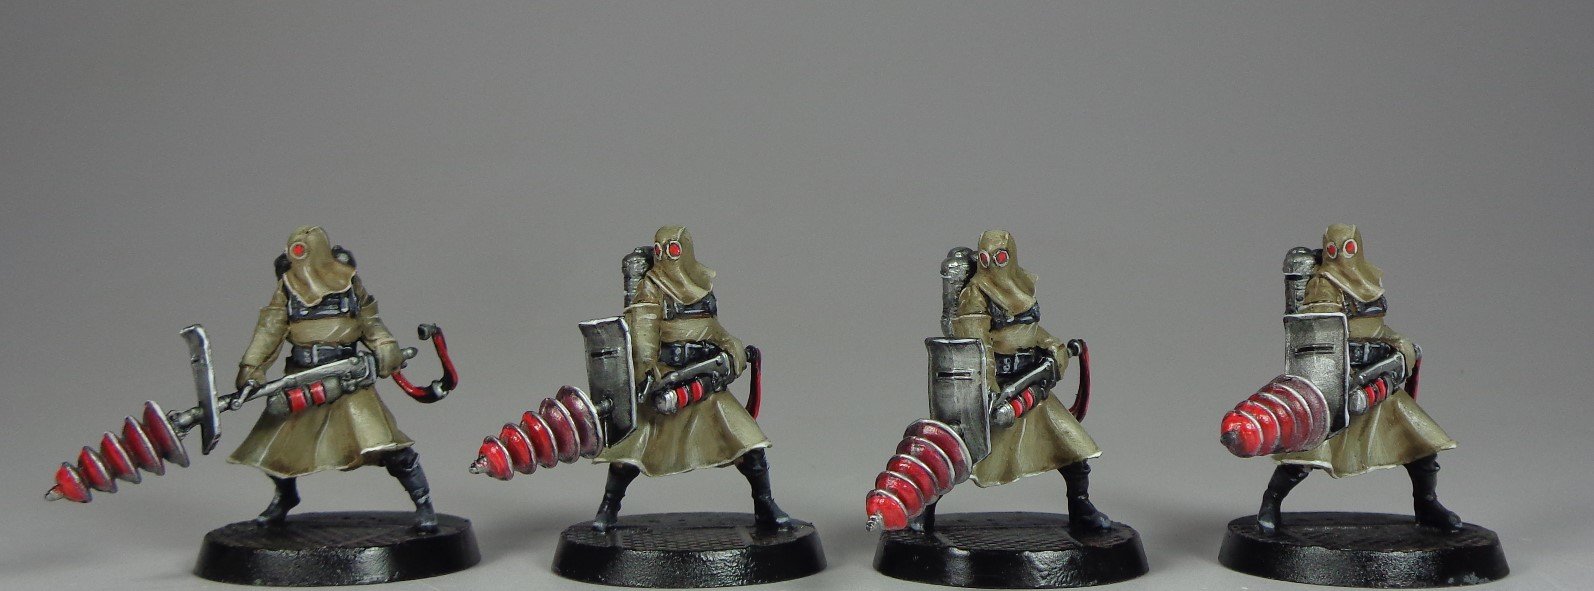 Reichbusters Paintedfigs Miniature Painting Service  (11).jpg